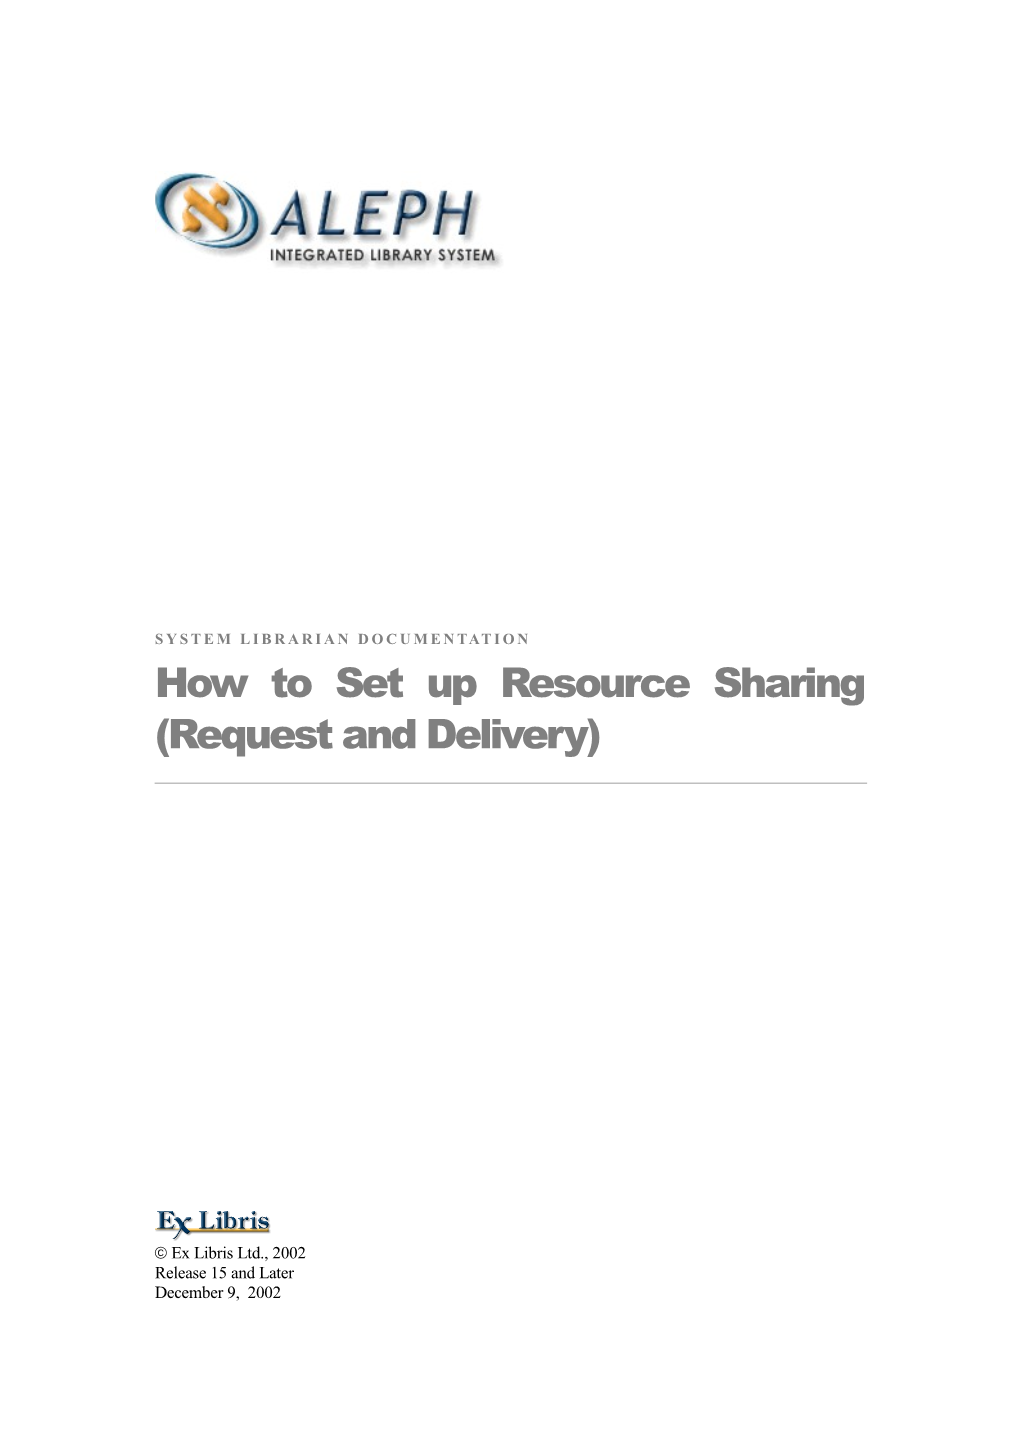 How to Set up Resource Sharing 15